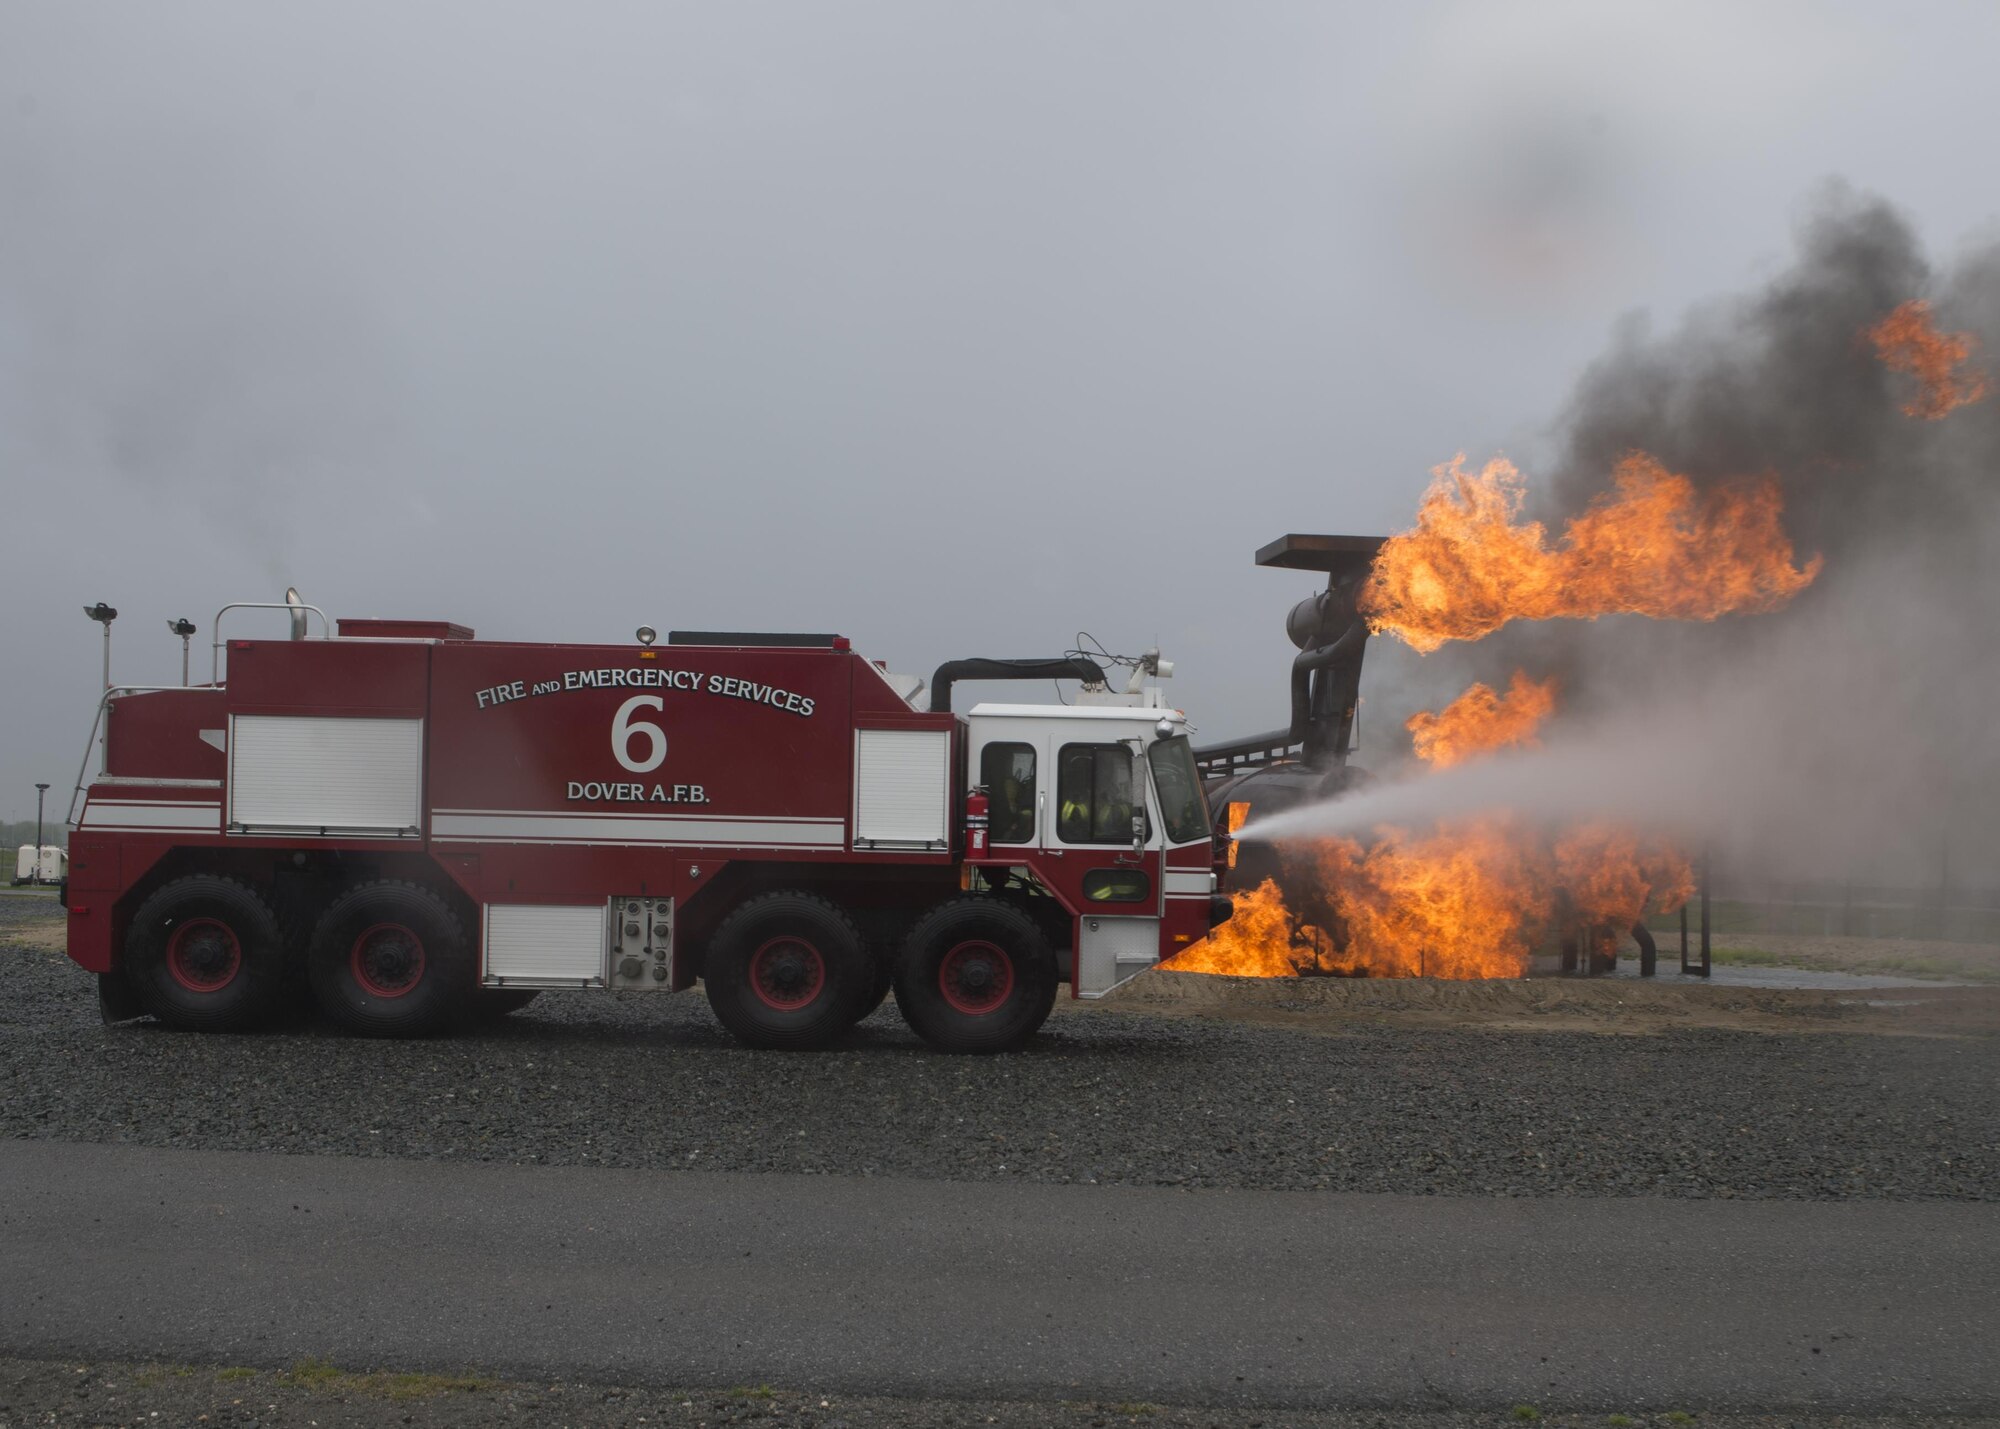 Airmen with the 512th Airlift Wing train fire-fighting skills as they extinguish an aircraft fire at Dover Air Force Base, Del., April 23, 2016. This training occurs twice a year to keep the fire fighters current and proficient in their training requirements. (U.S. Air Force photo by Tech. Sgt. Nathan Rivard)